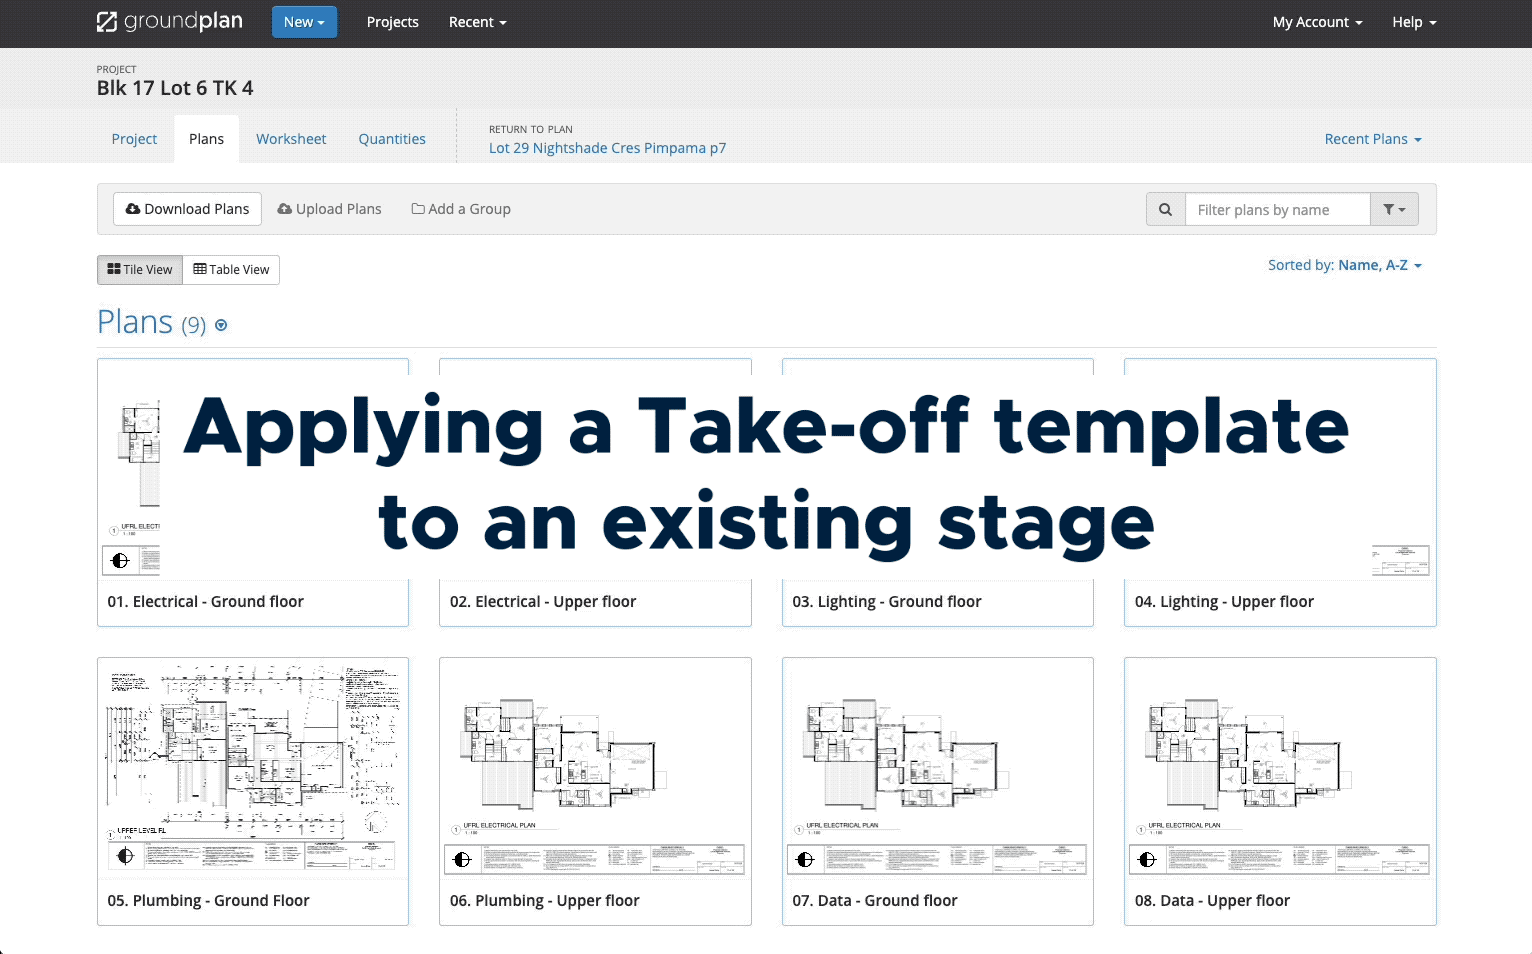 D - Applying a Takeoff template to existing stage